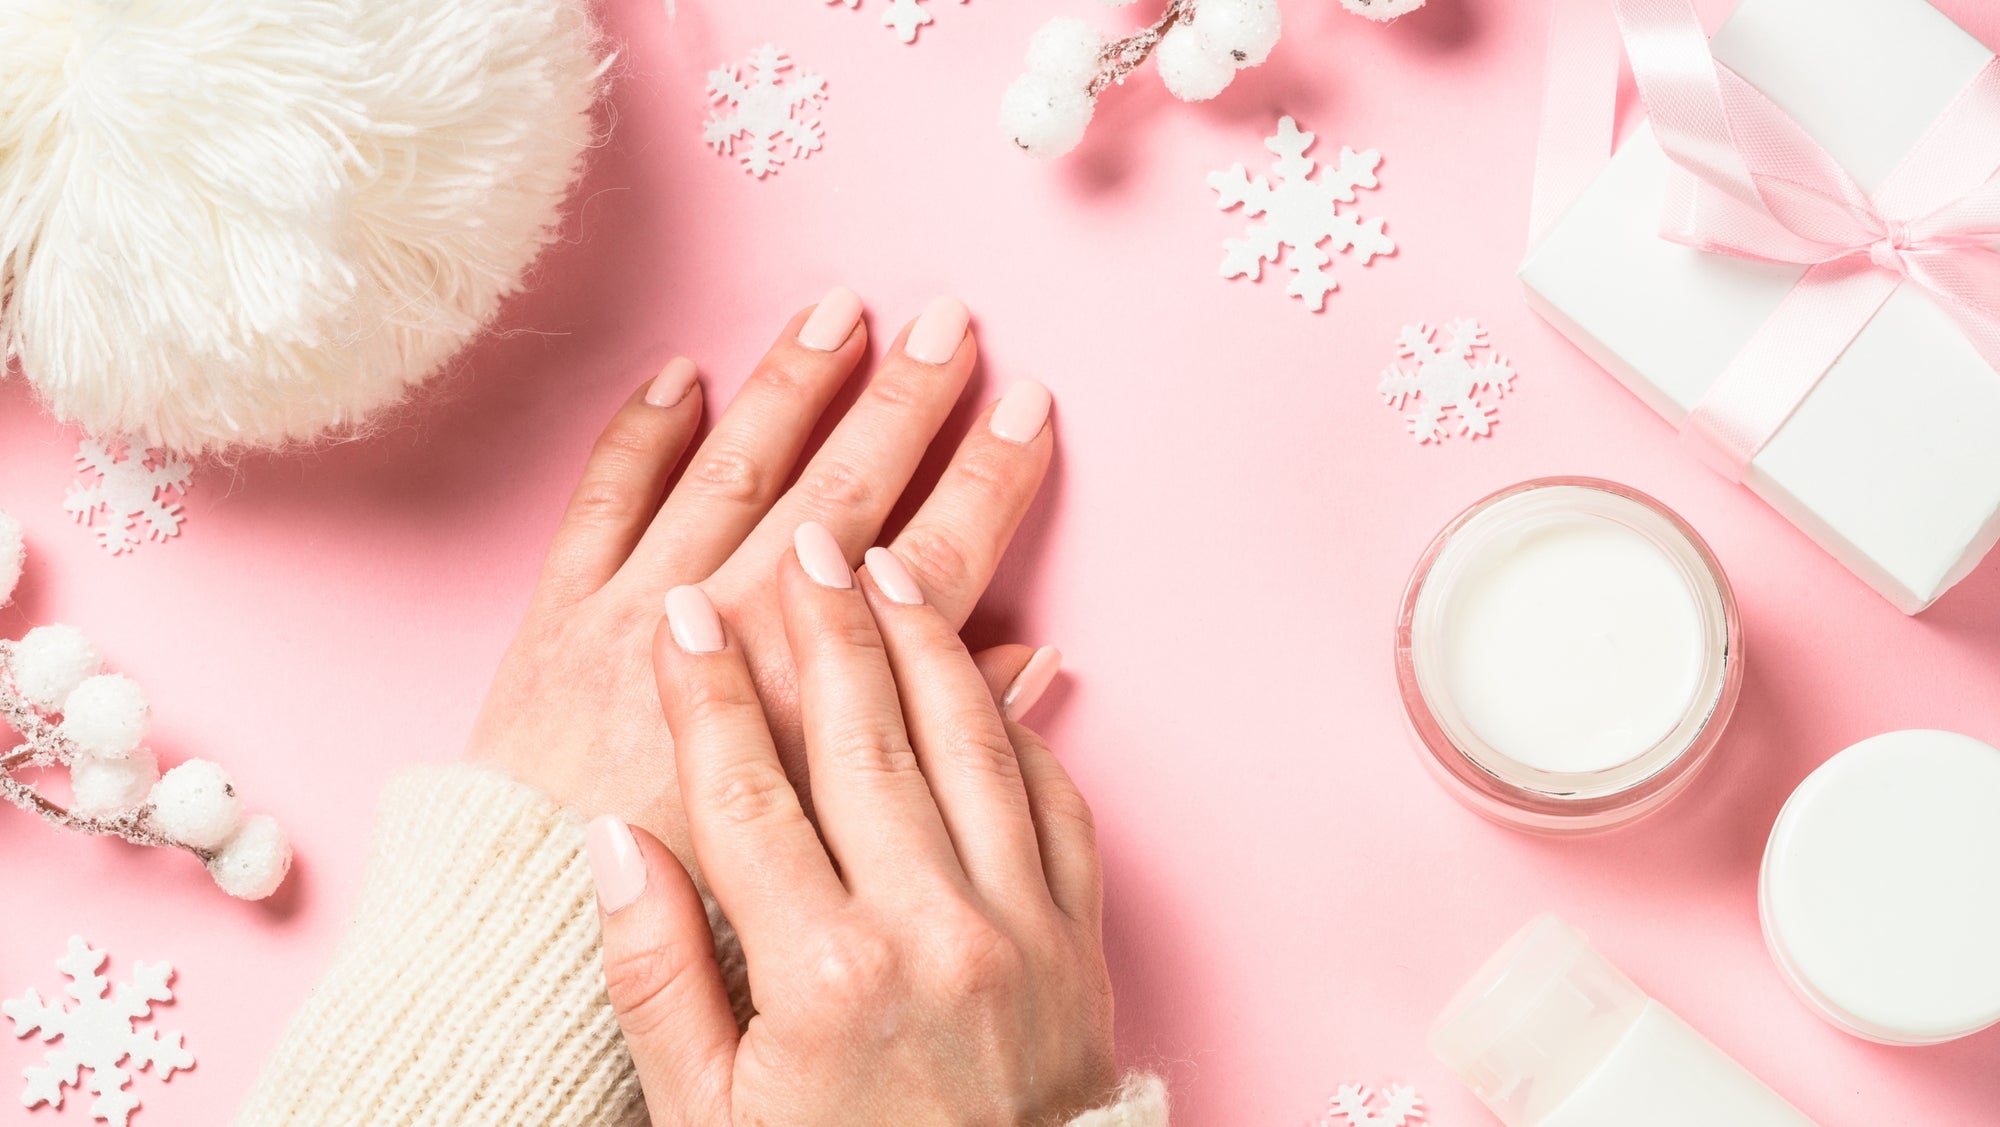 Decoding skin - A holiday edition